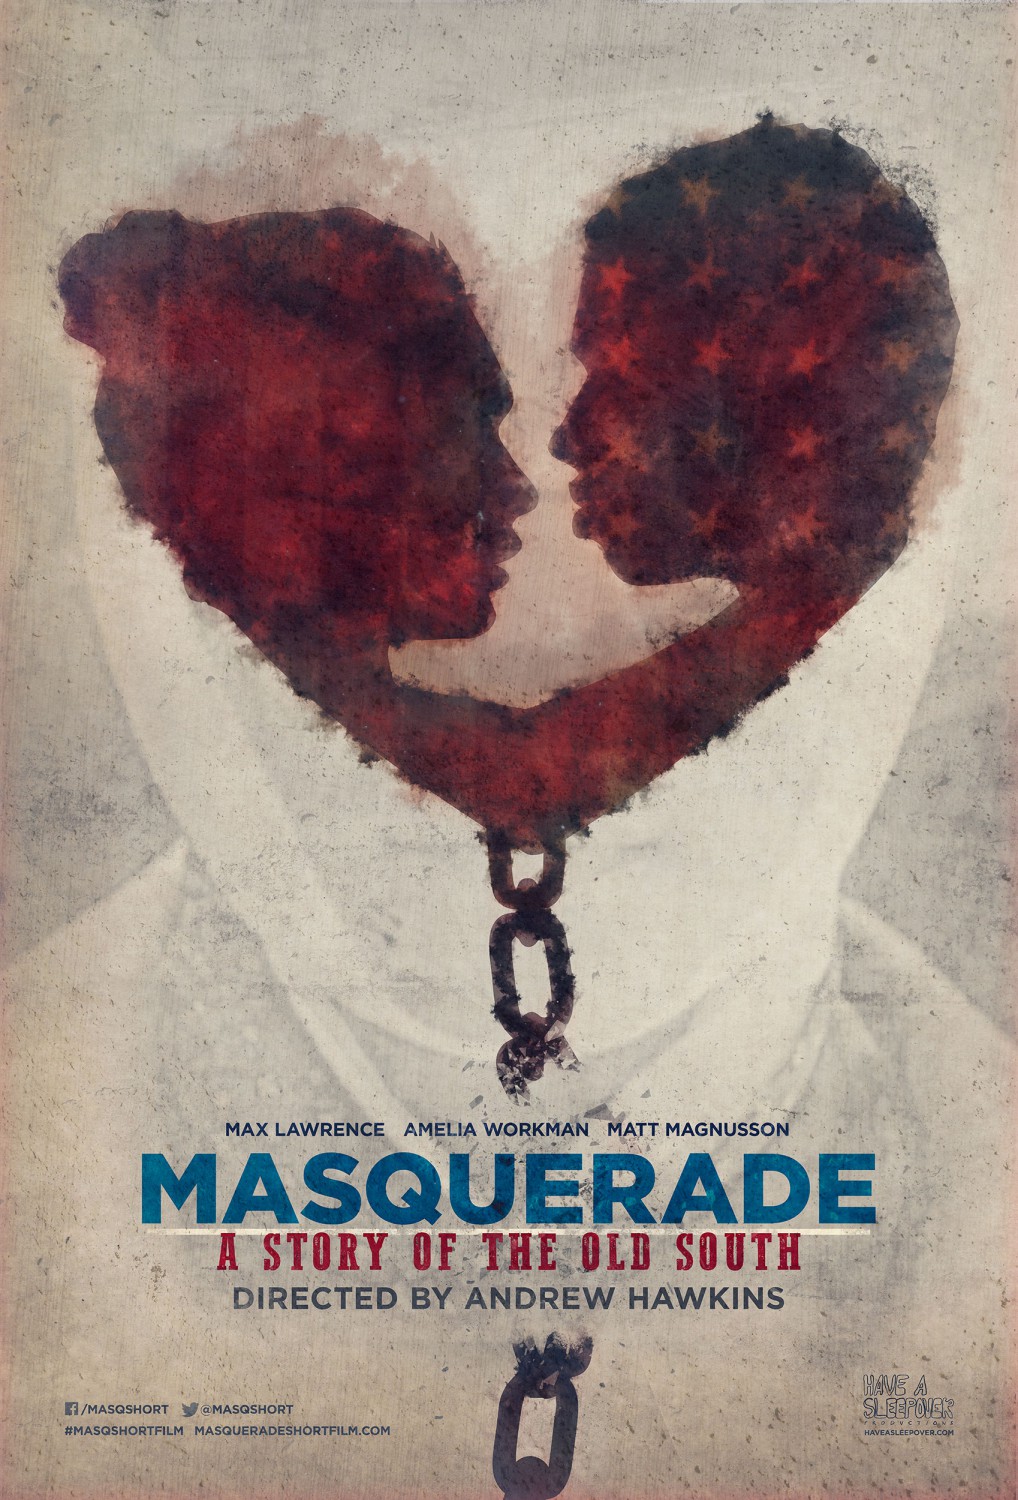 Extra Large Movie Poster Image for Masquerade, a Story of the Old South